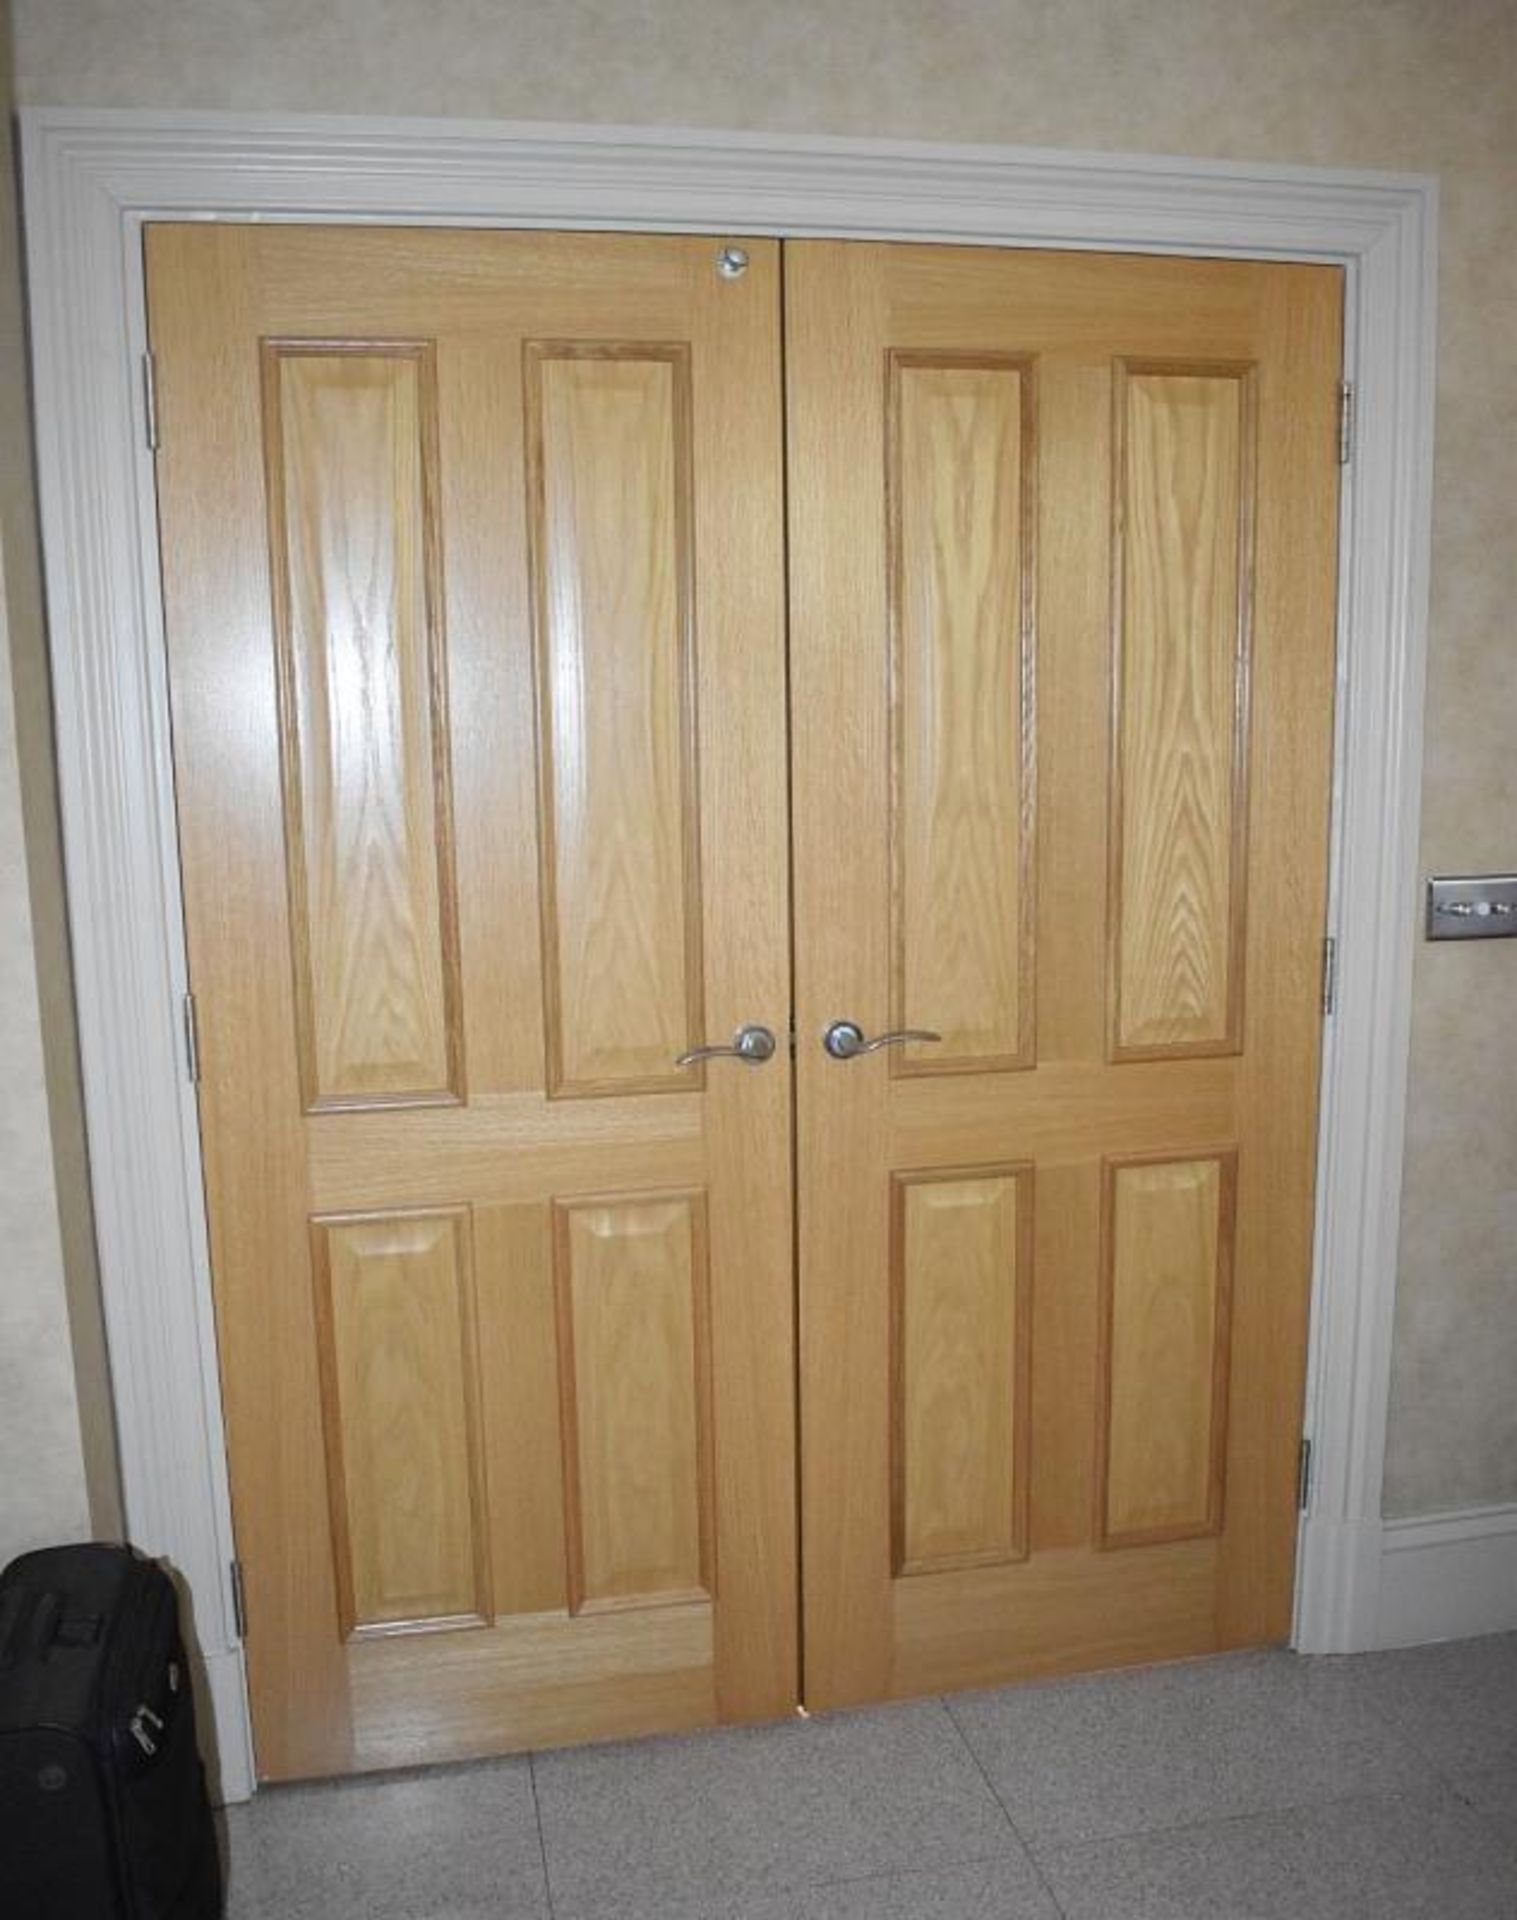 A Pair Of High Quality Internal Wooden Doors - Dimensions Of Each (approx): H200 x W75 x 7cm - Ref: